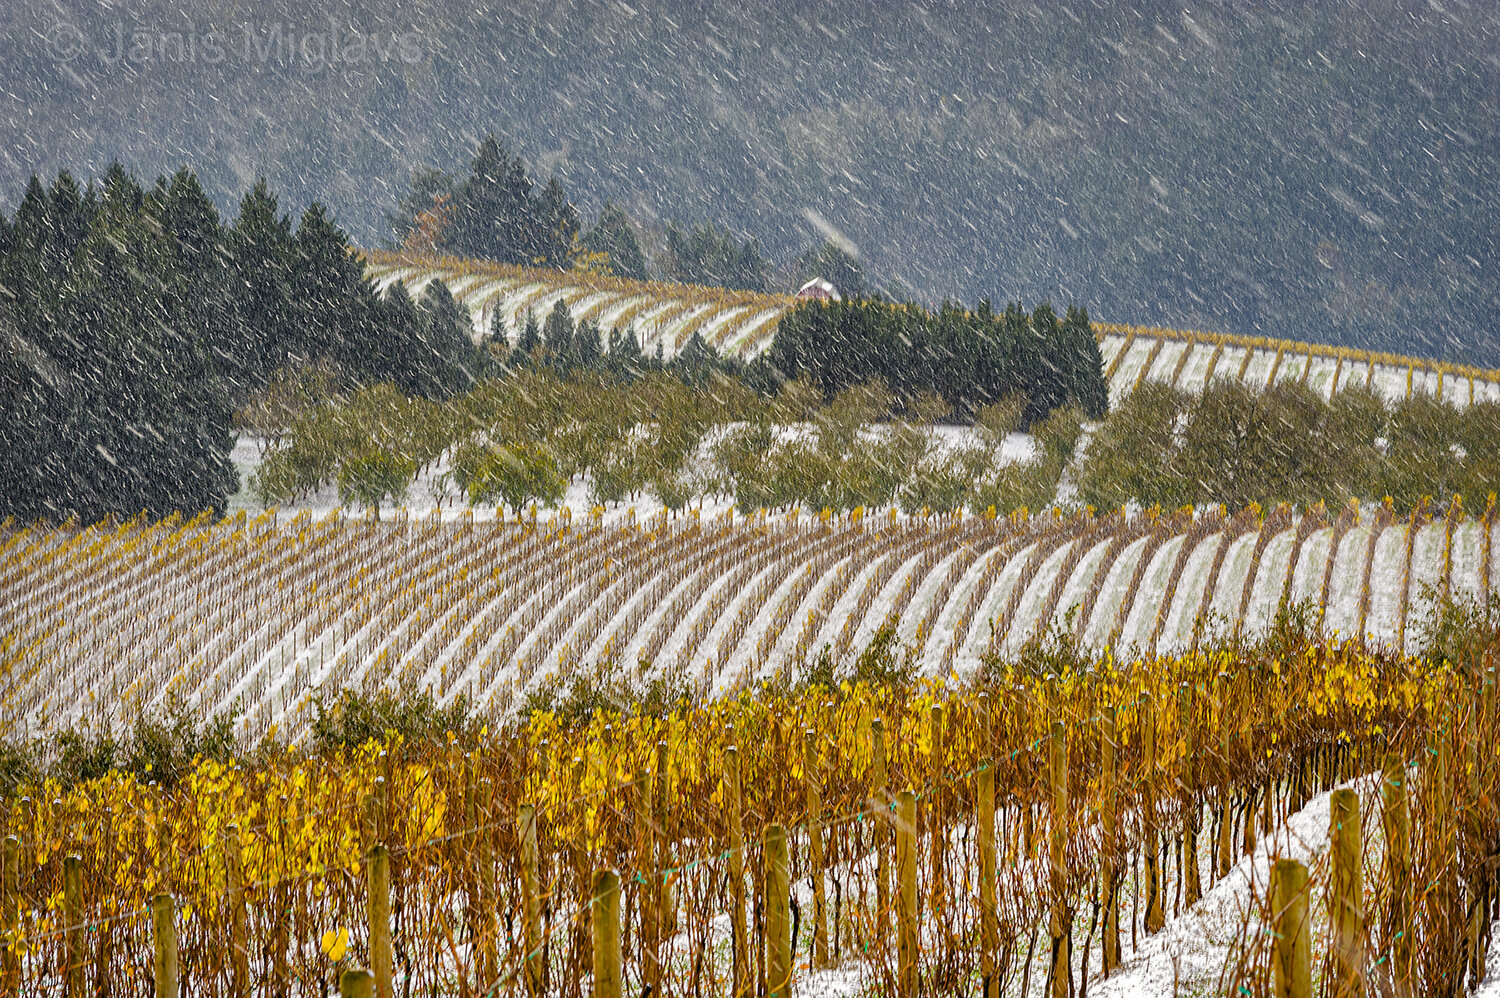 Snow falls on Fall-colored vines